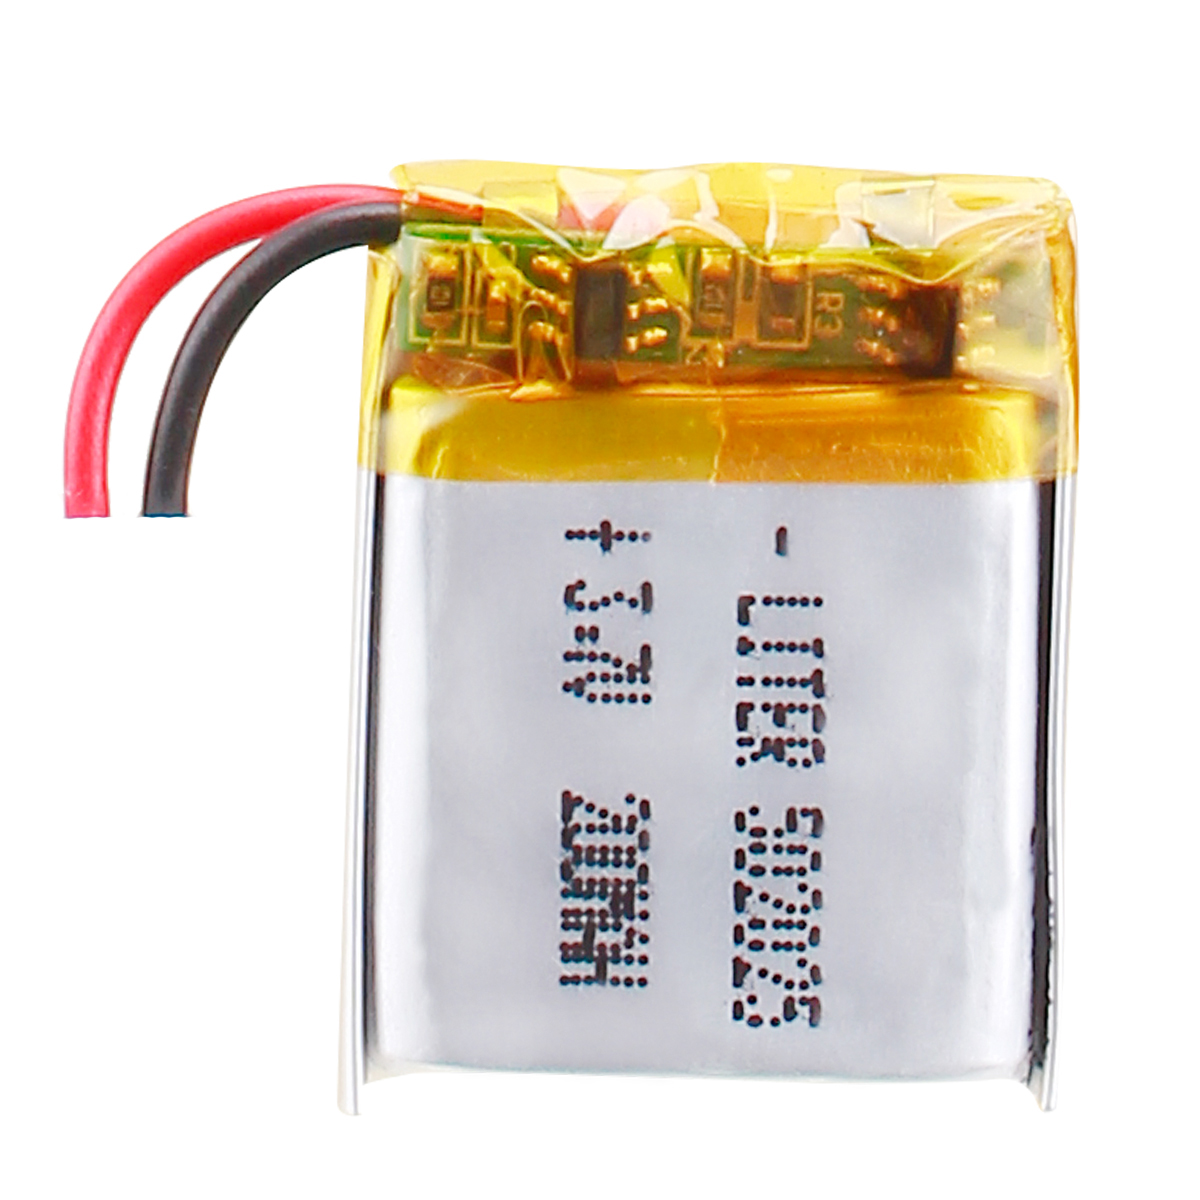 502025 180mAh 3.7V Rechargeable LiPo Battery Batteries with connector JST SHR-02V-S-B A